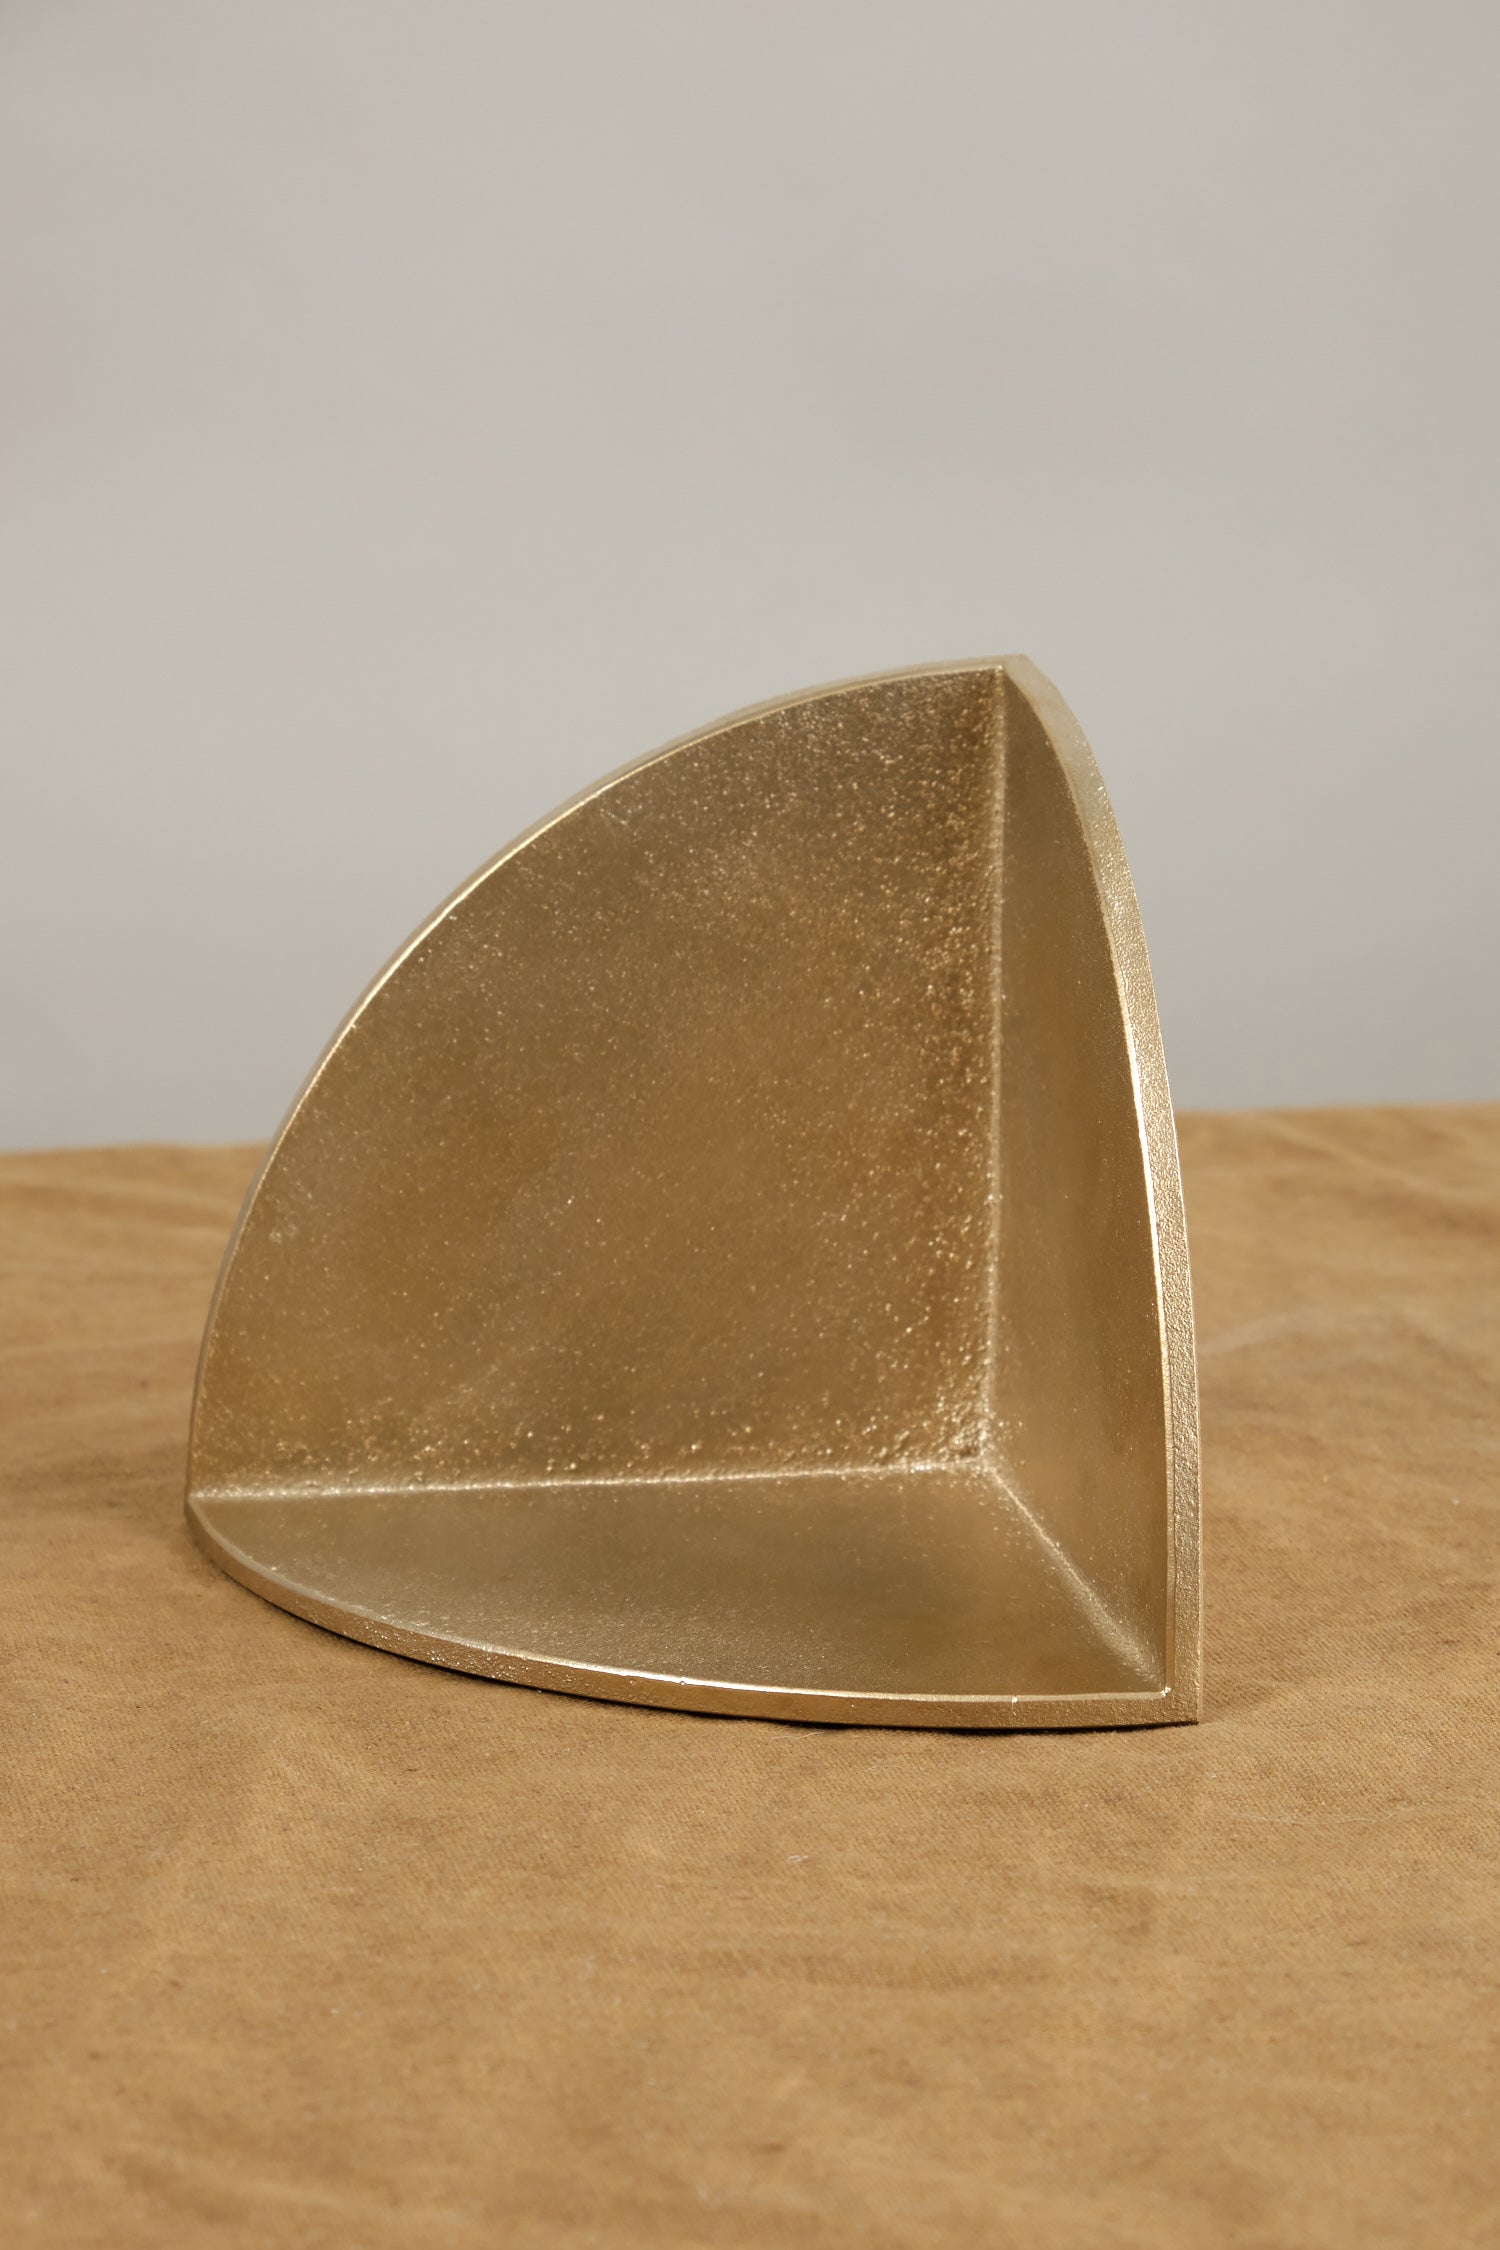 Side of Brass Bookend